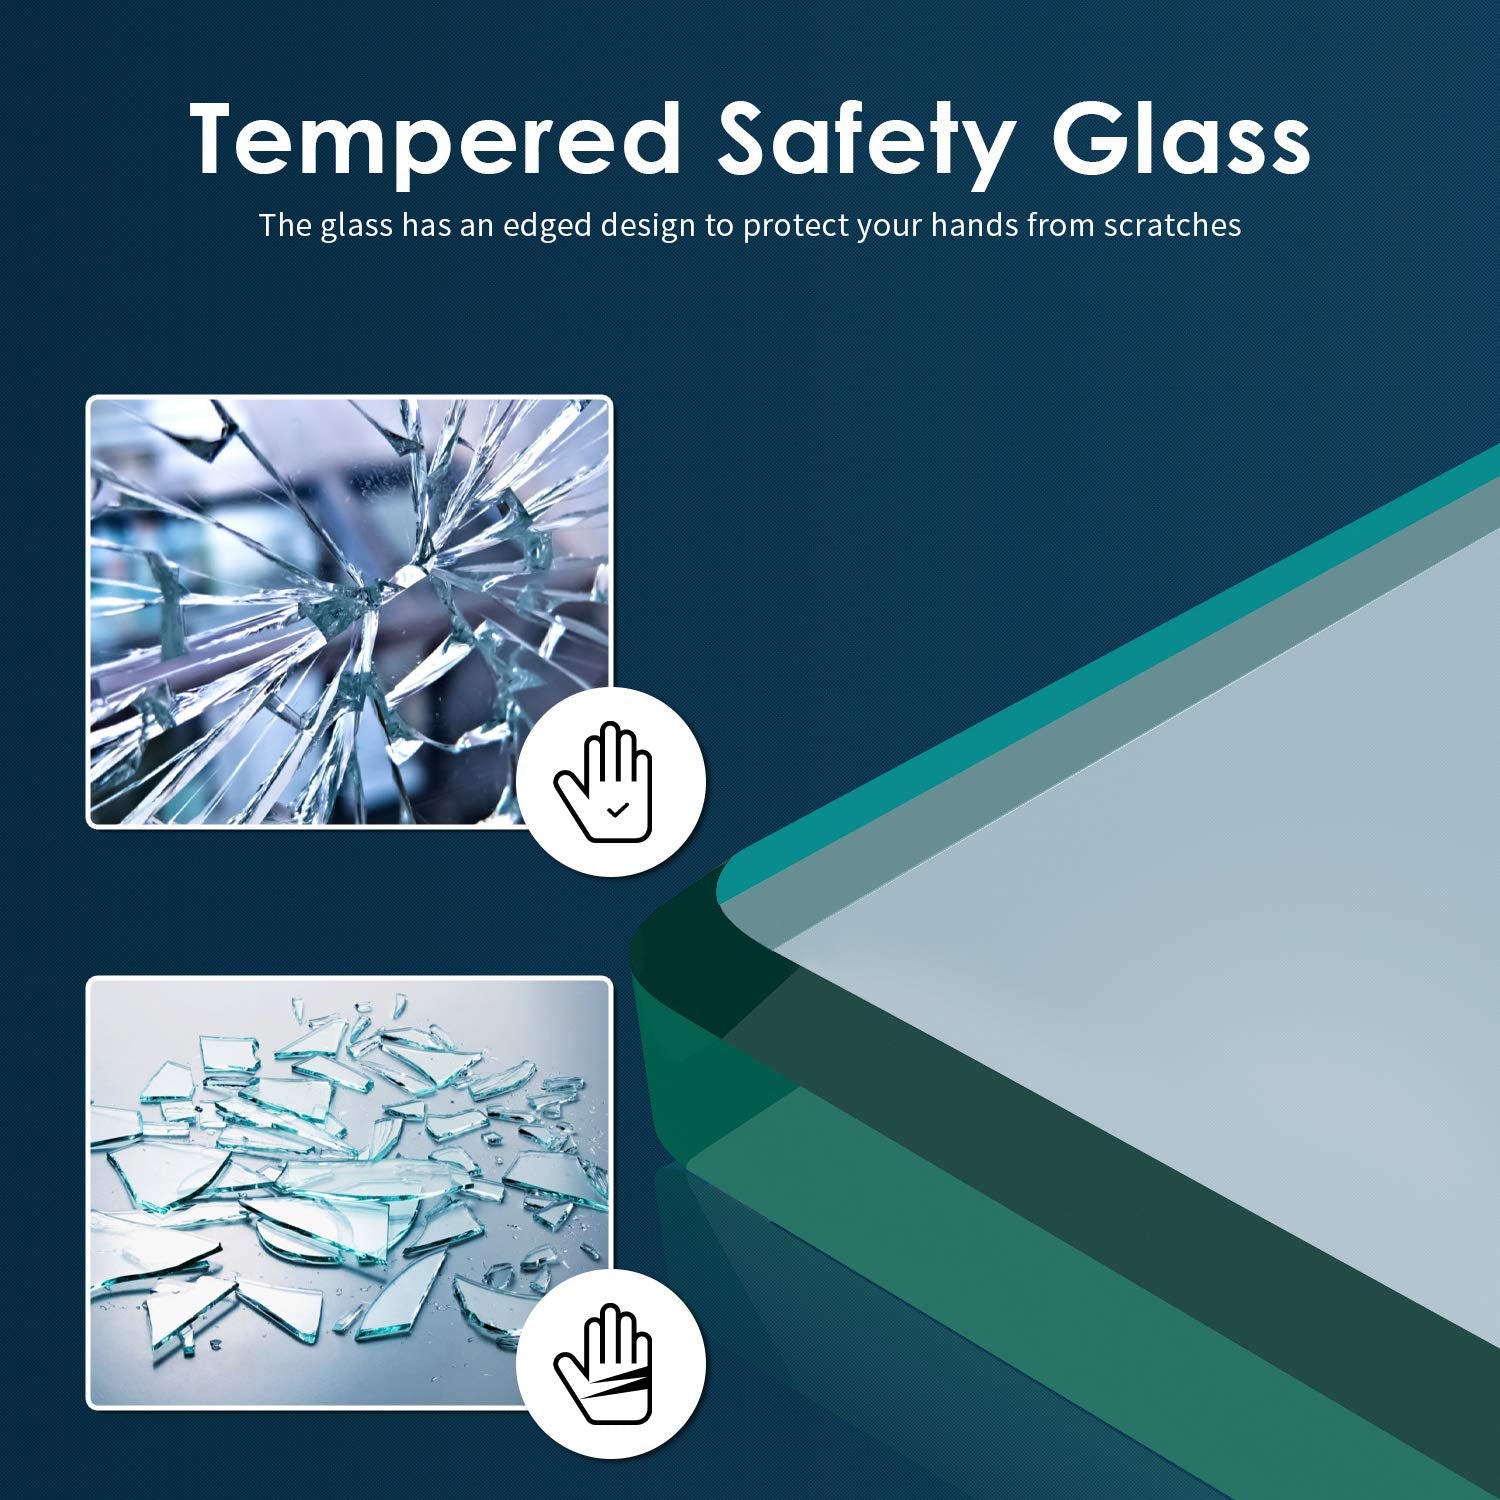 The 1/4-inch thick tempered safety glass provides thorough, shatterproof protection for showering comfortably and safely